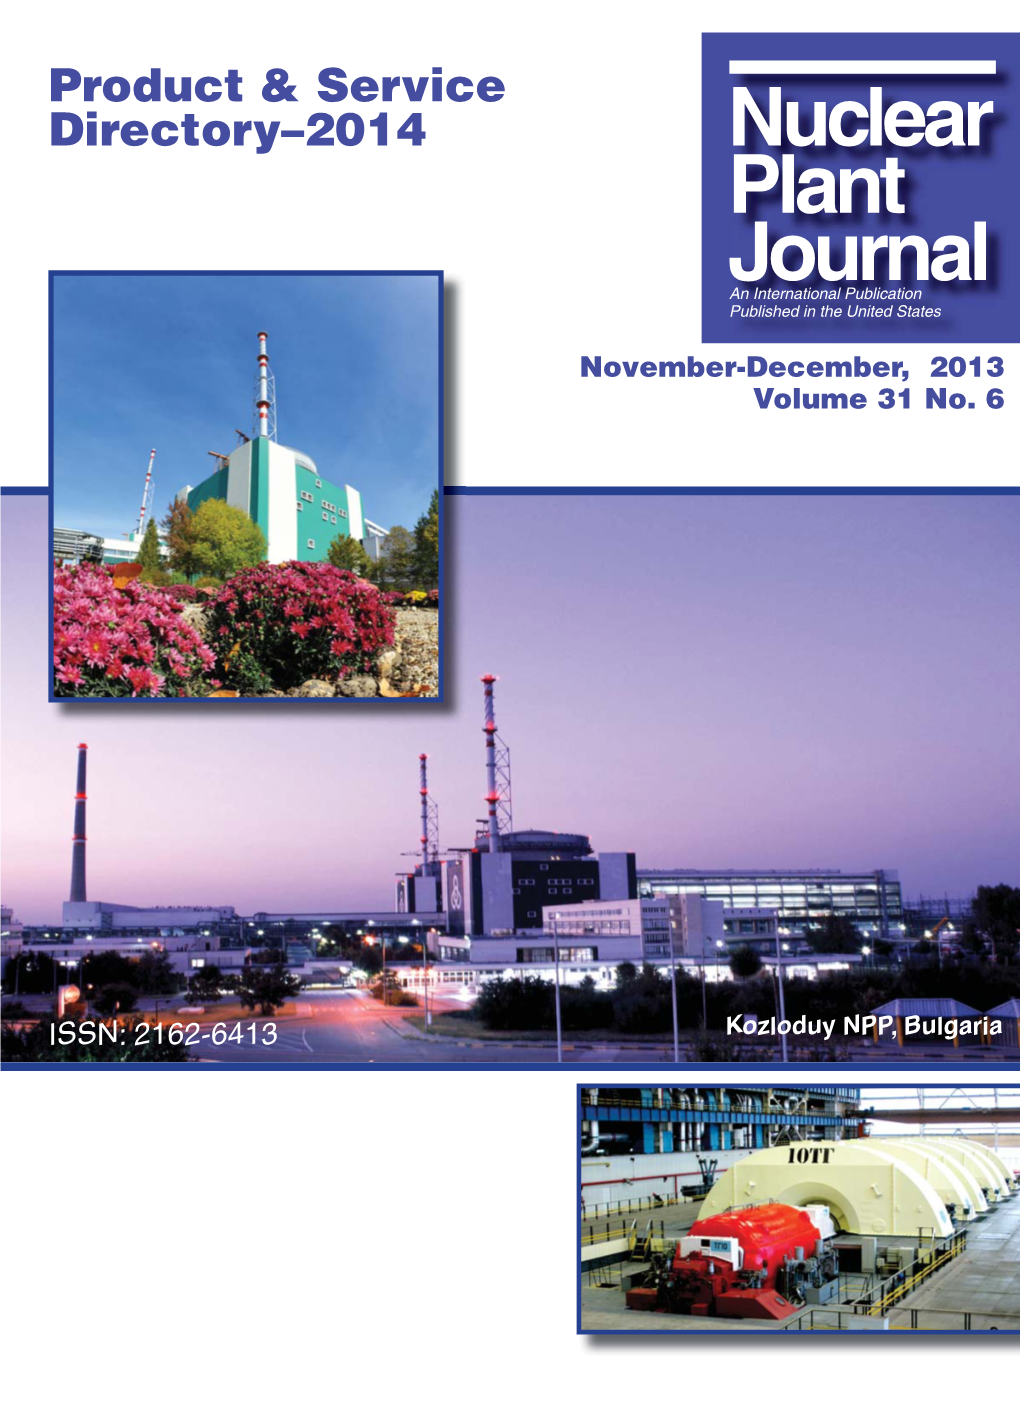 Nuclear Plant Journal